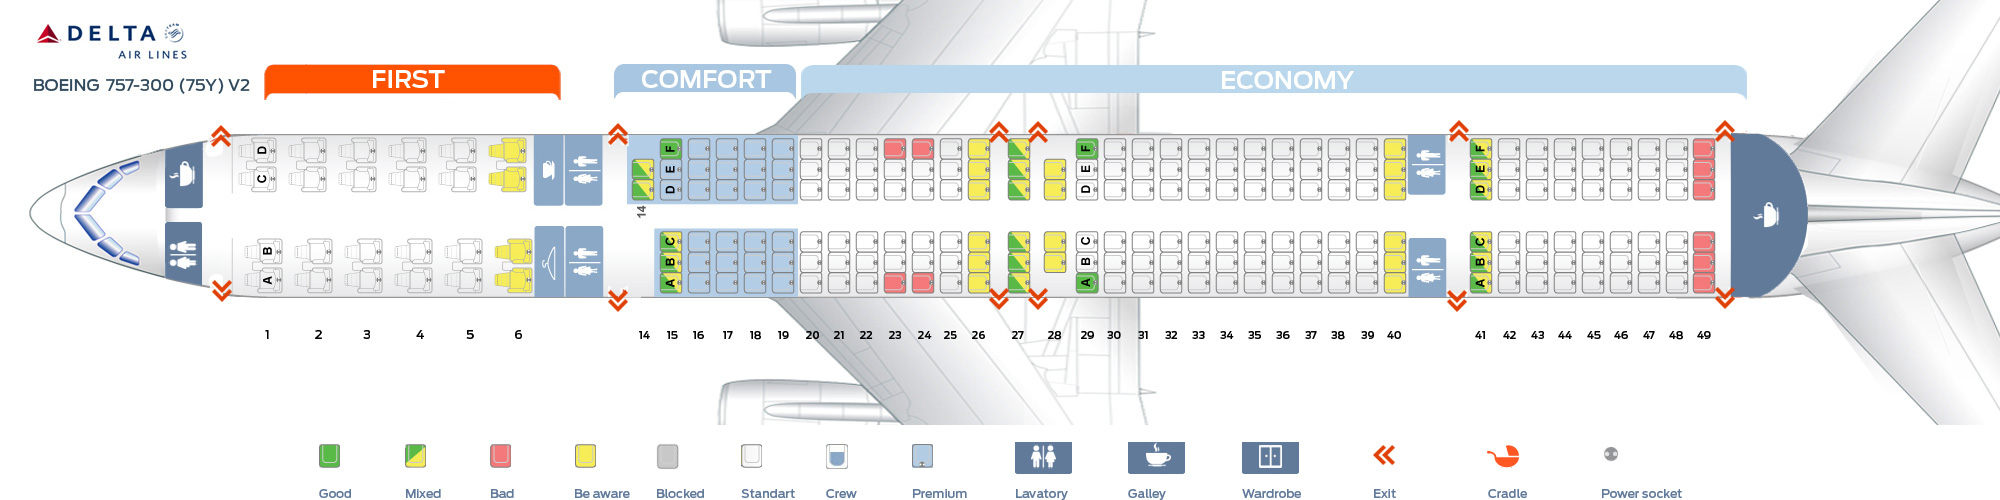 Seat map Boeing 757300 Delta Airlines. Best seats in plane